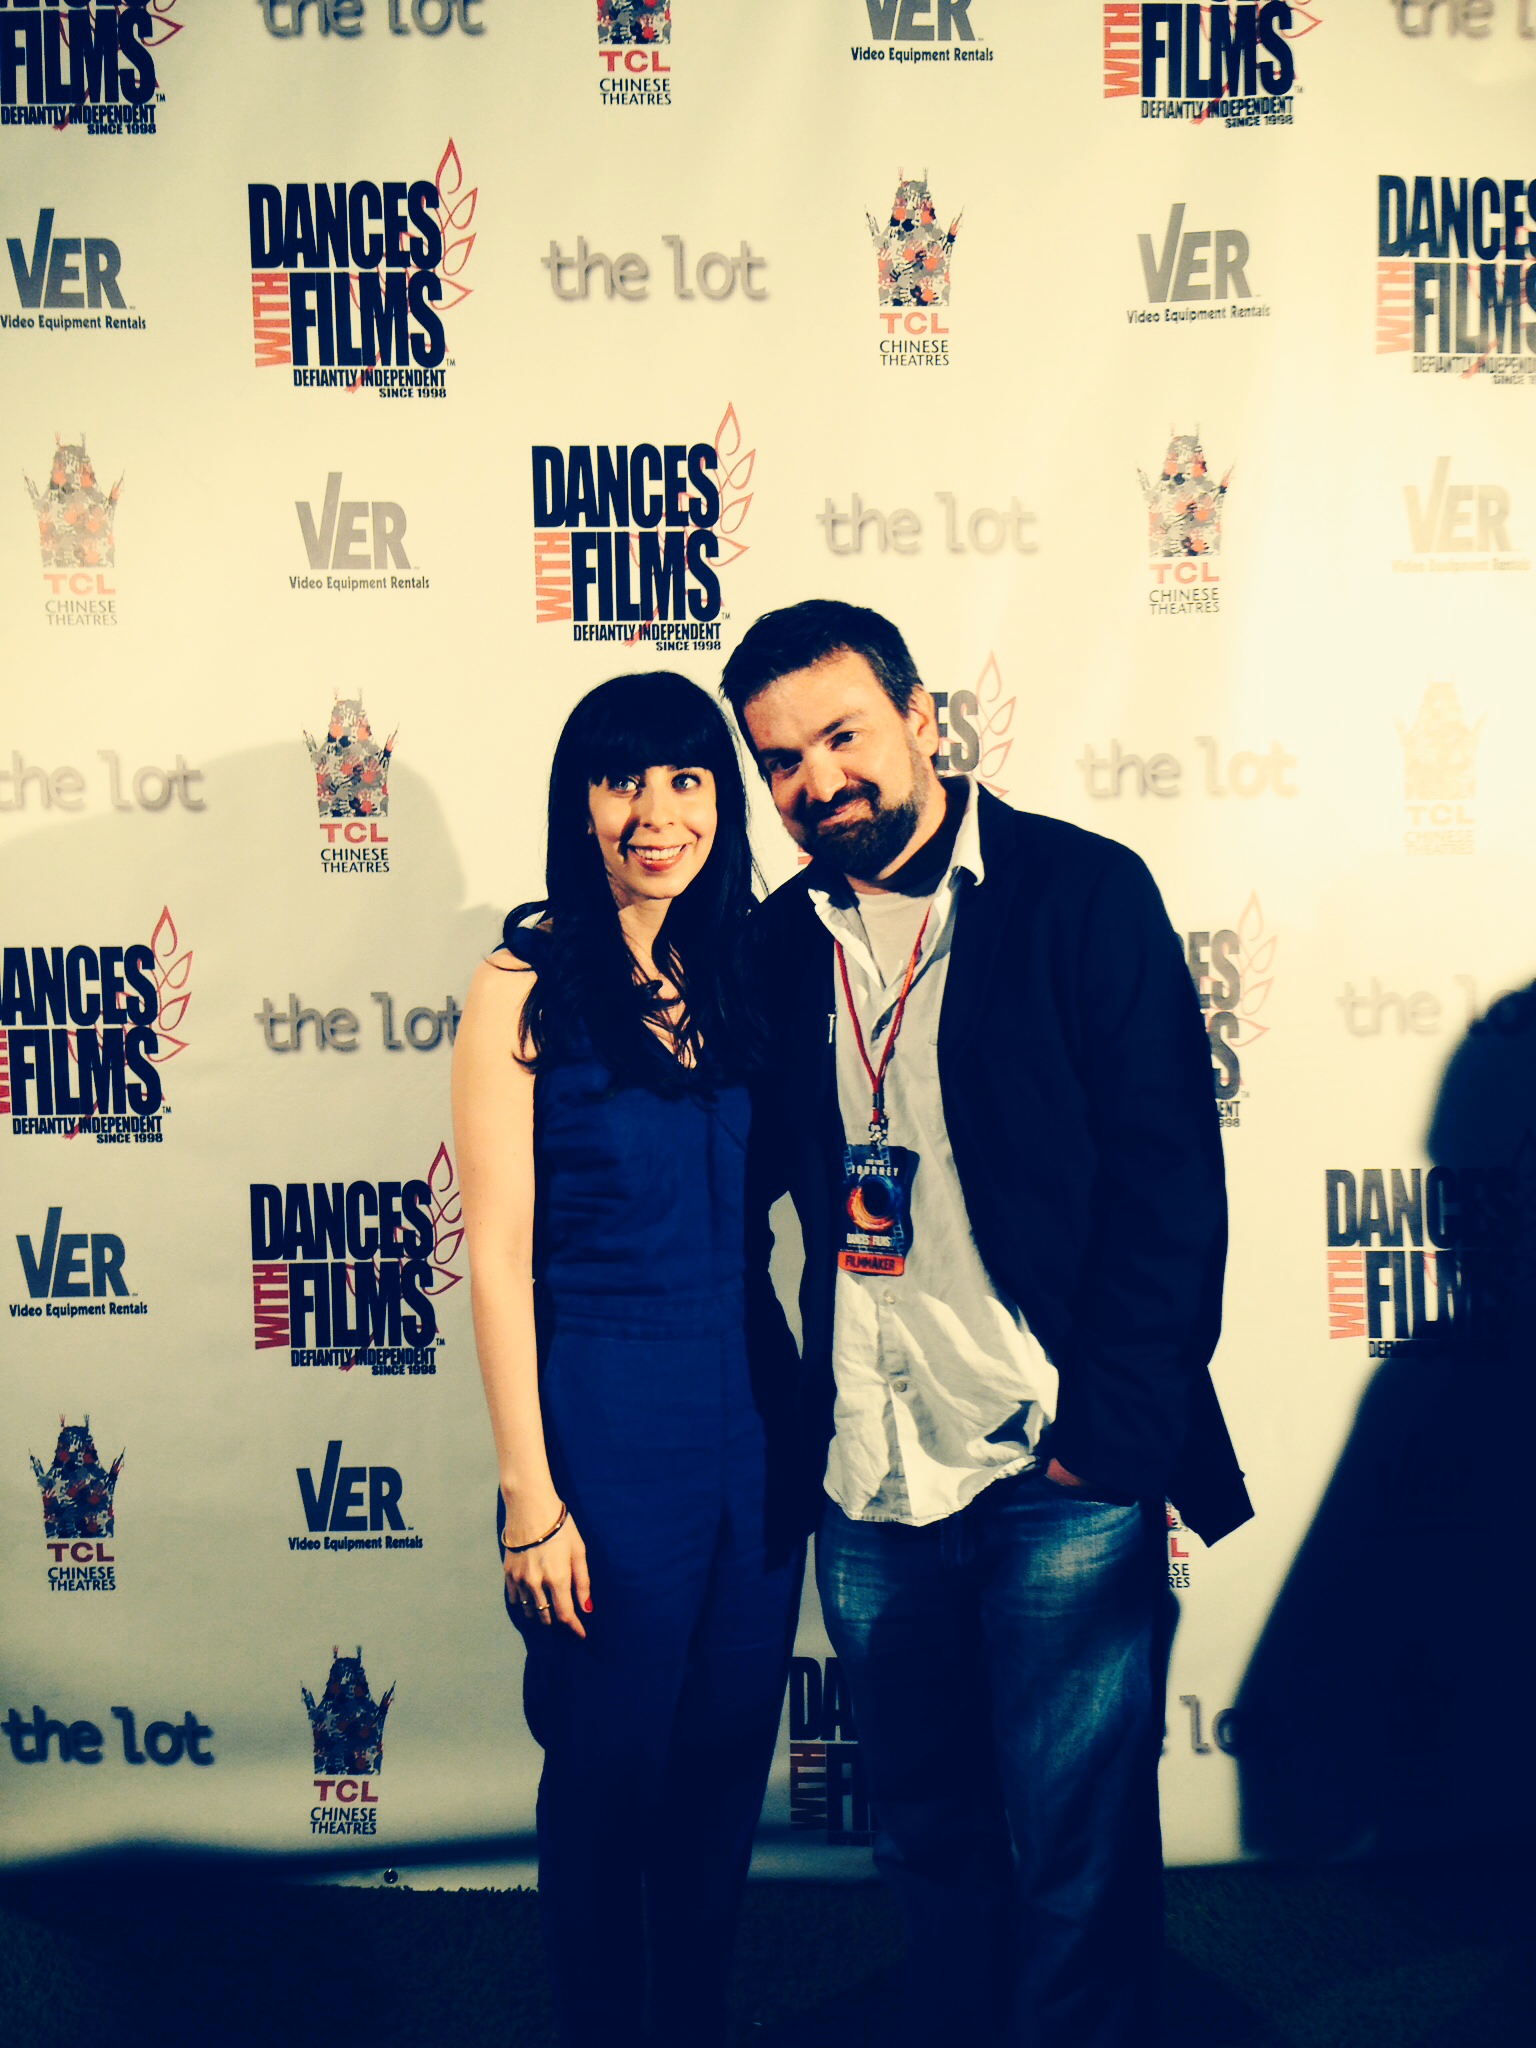 Audrey Lynn Weston and John Salcido at the L.A. premiere of TRIBUTE